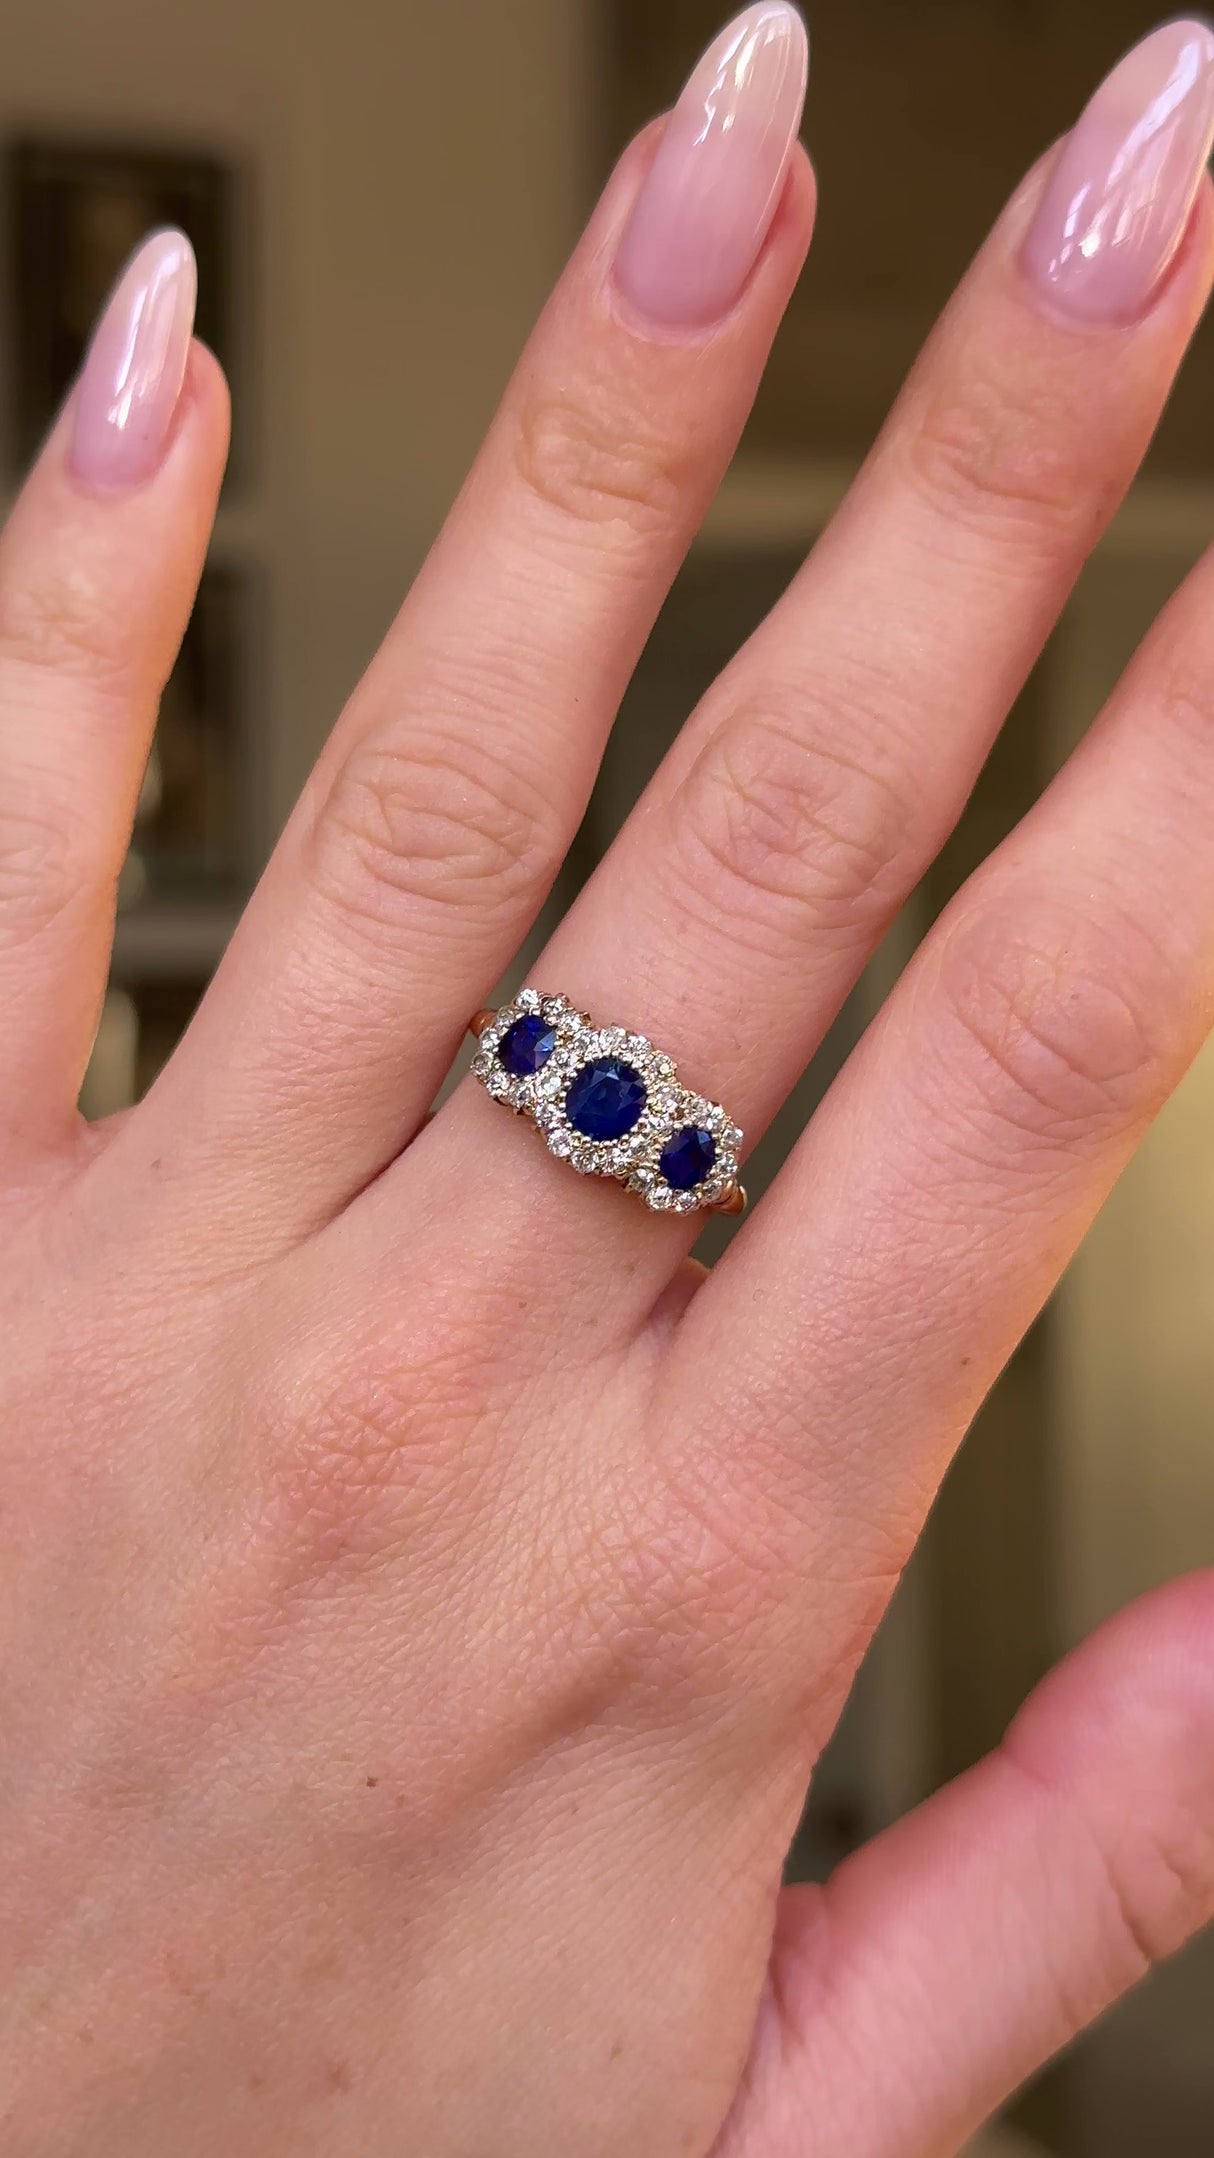 sapphire and diamond triple cluster ring worn on hand and moved arund to give perspective.